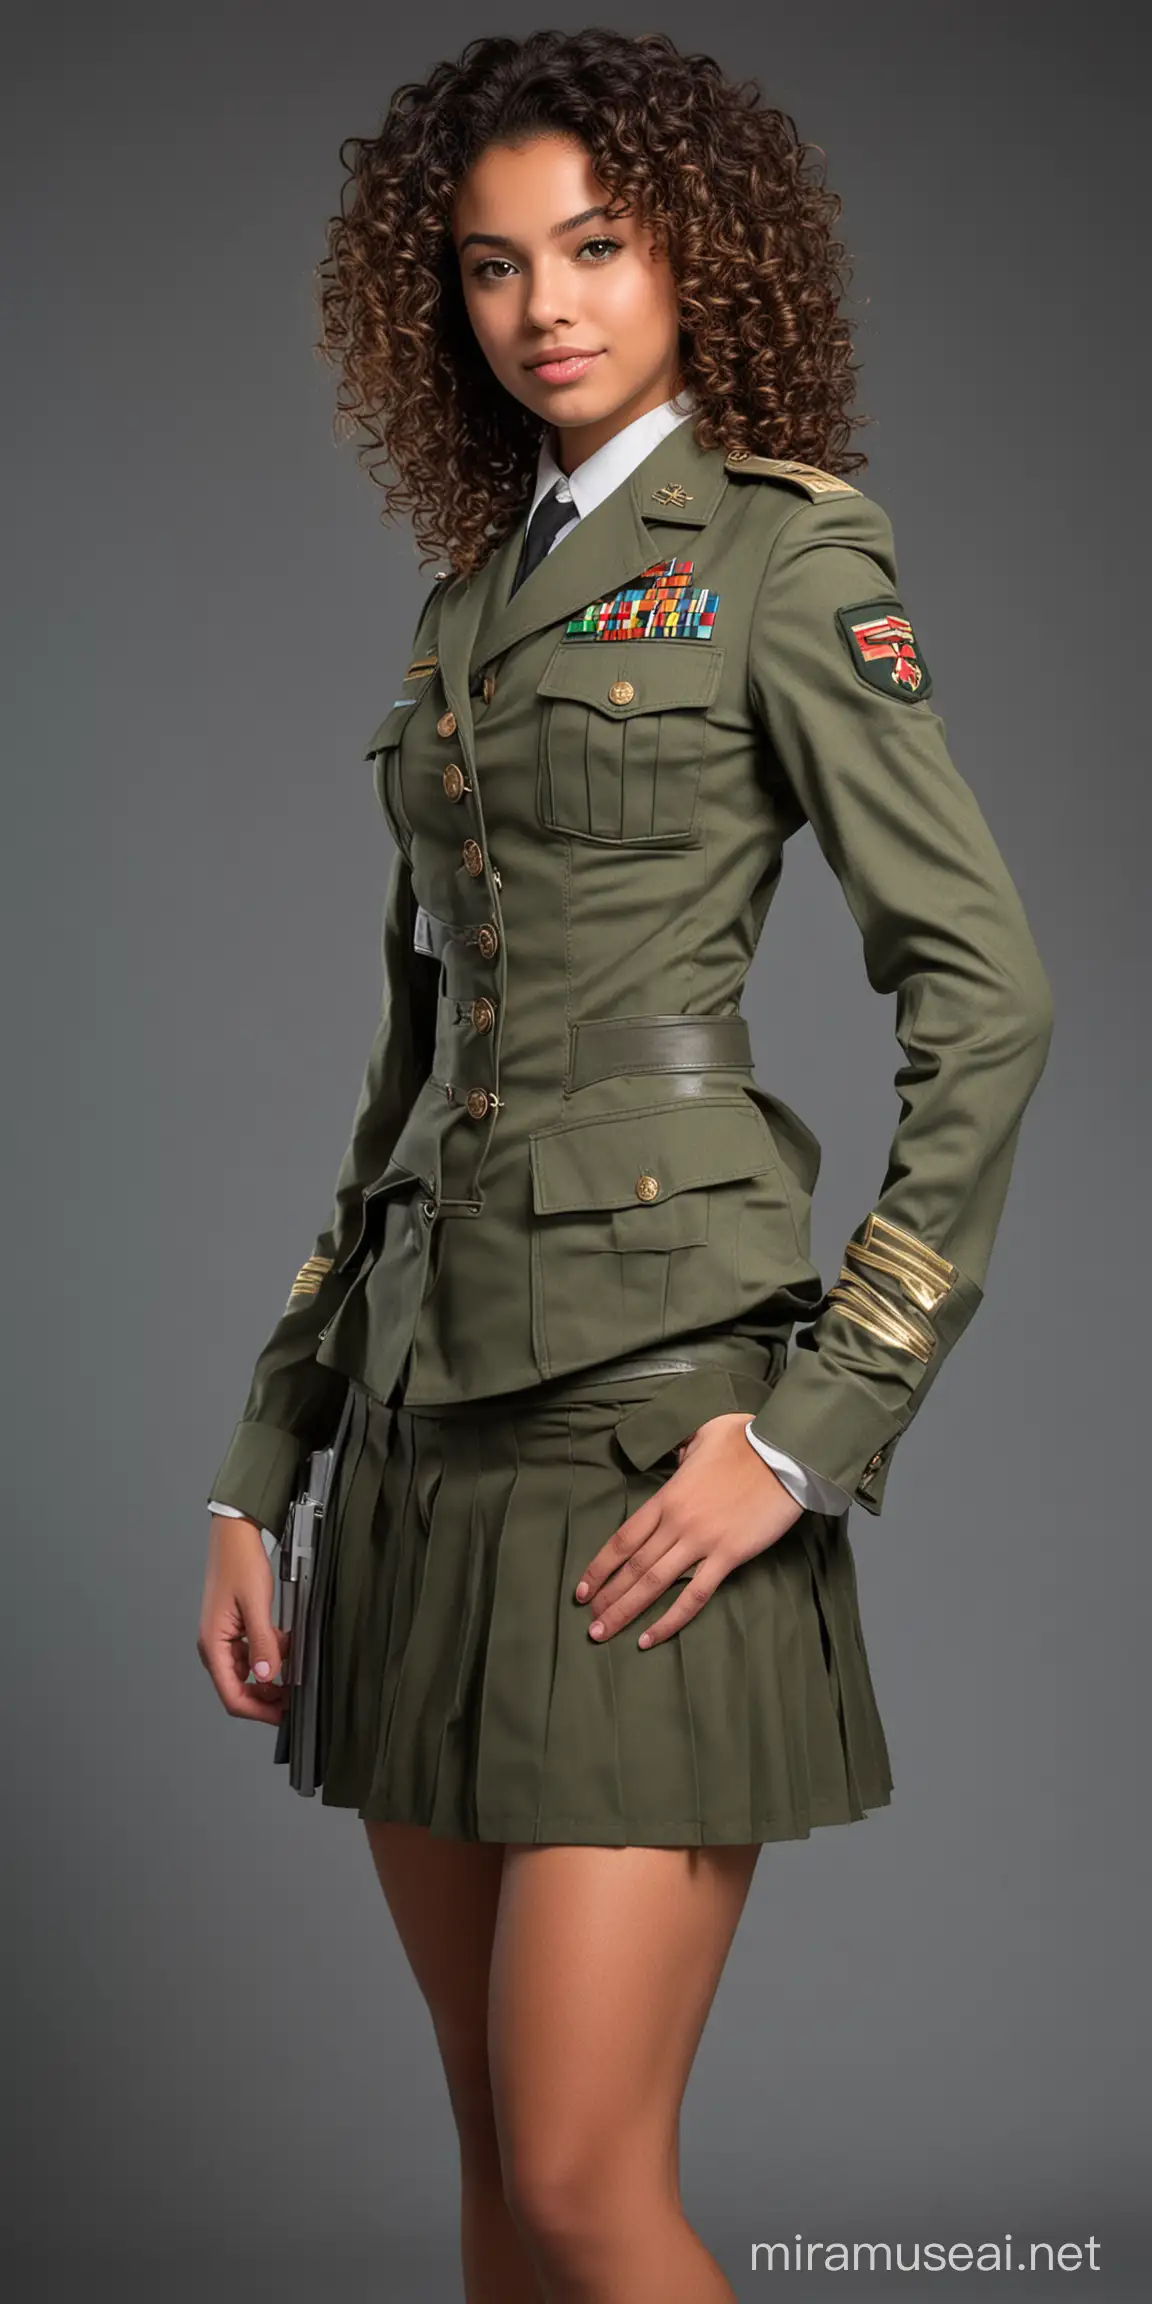 A 20-year-old giantess with dark skin and curly hair in military attire, including a military skirt, holding a shrink ray